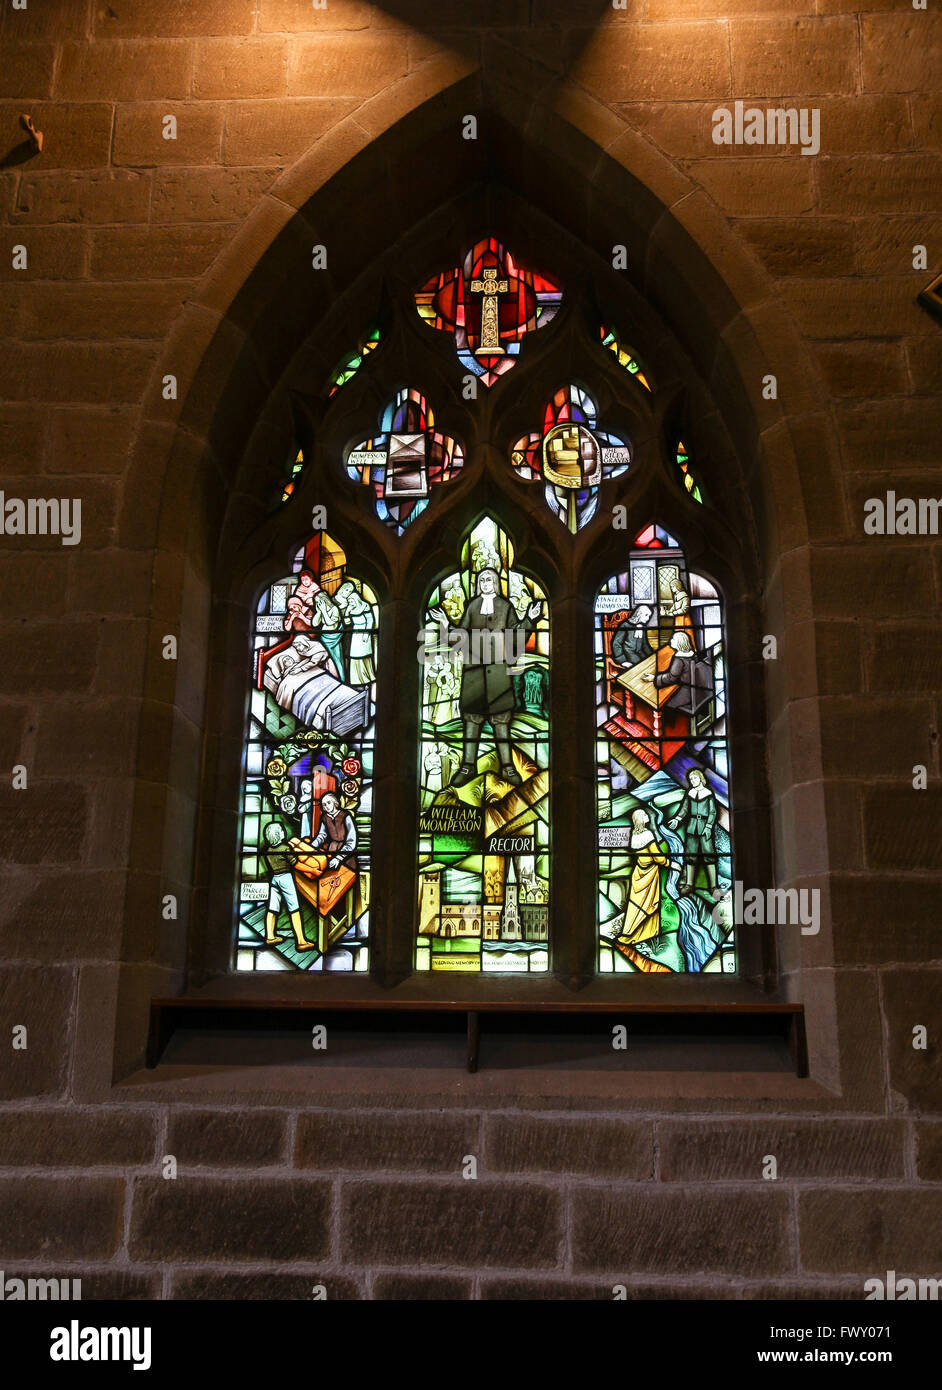 Stained glass window depicting the story of the plague in St Lawrence’s parish Church Eyam Derbyshire England UK Stock Photo